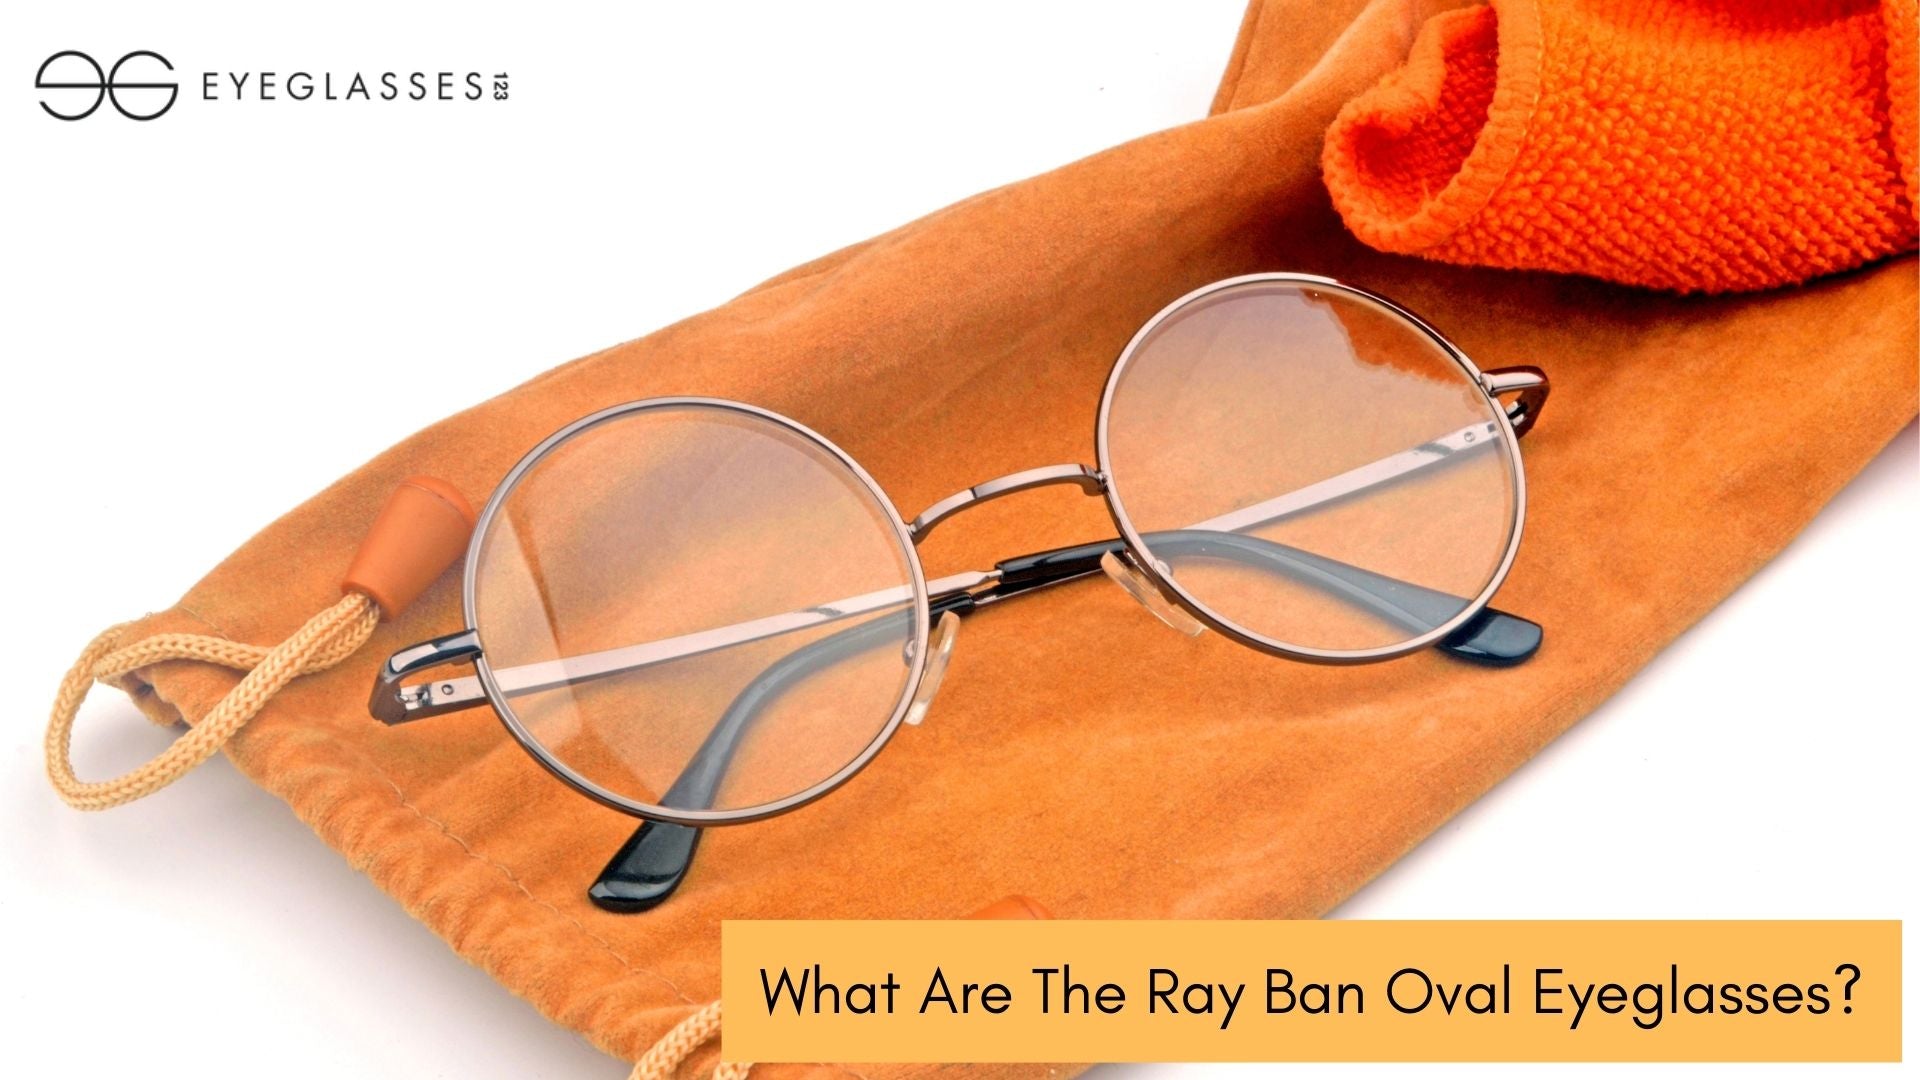 What Are The Ray Ban Oval Eyeglasses?